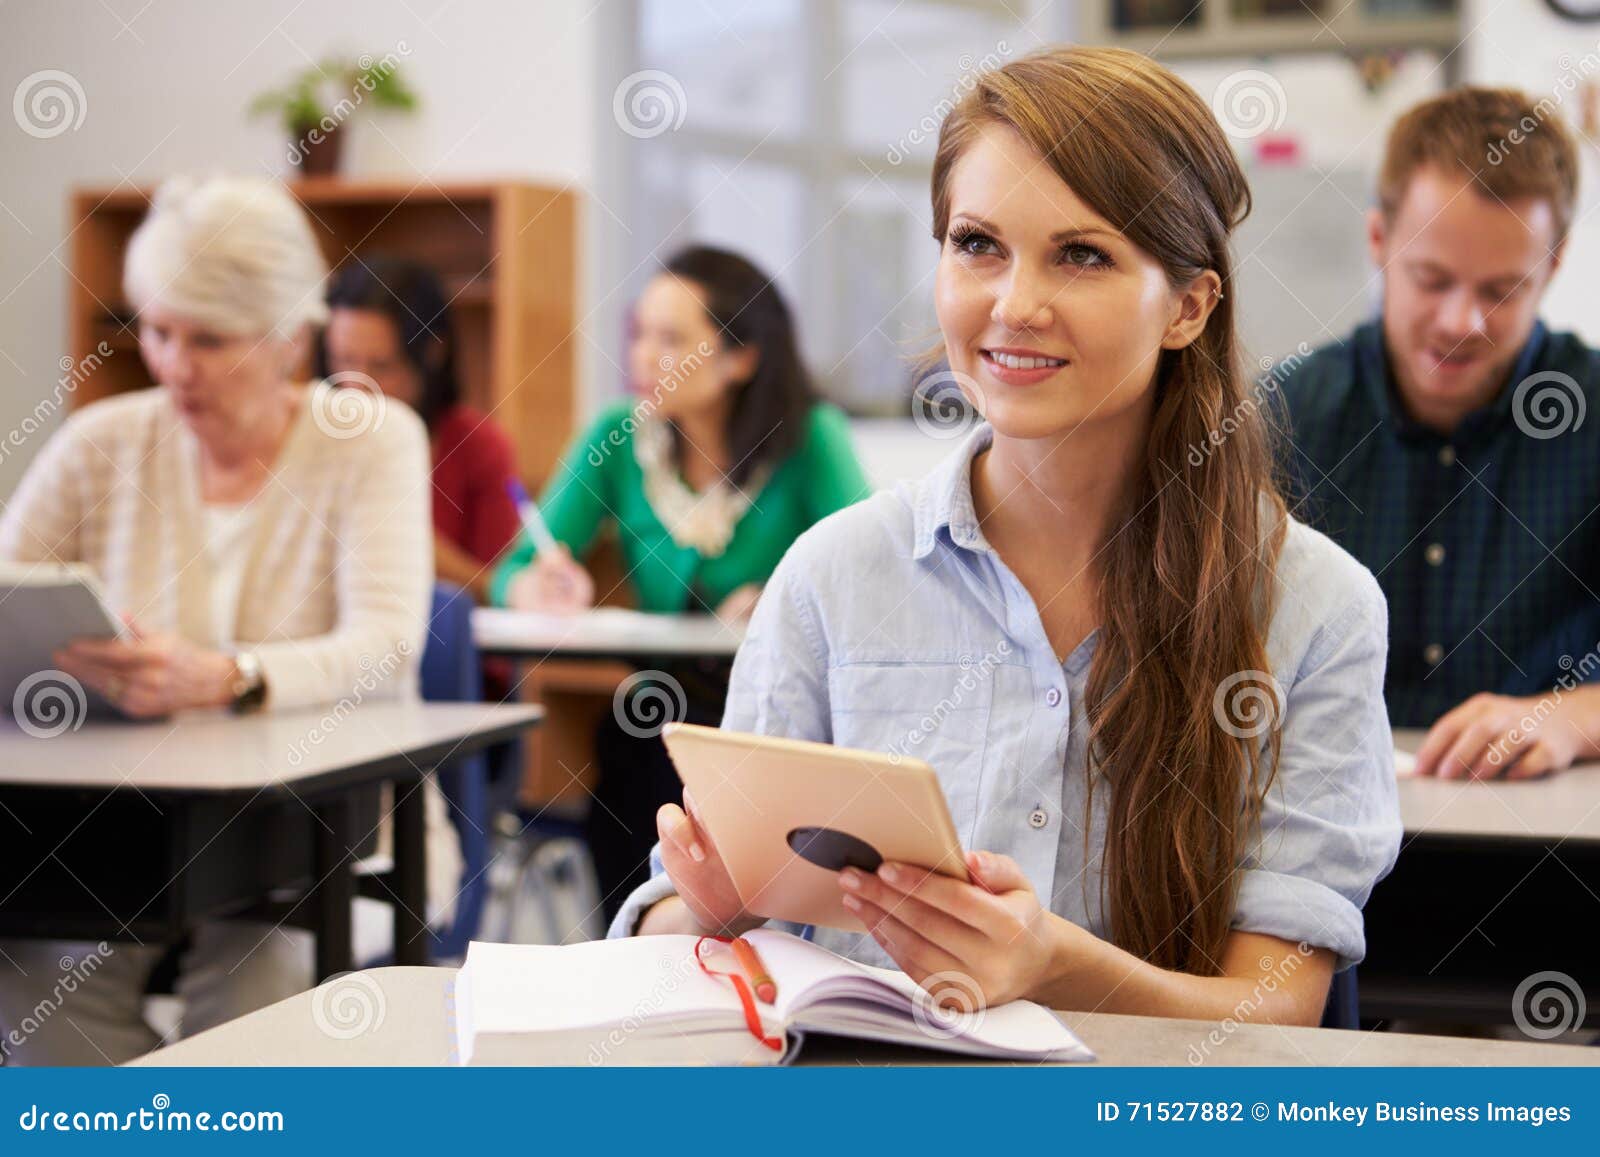 young woman with tablet computer at an adult education class